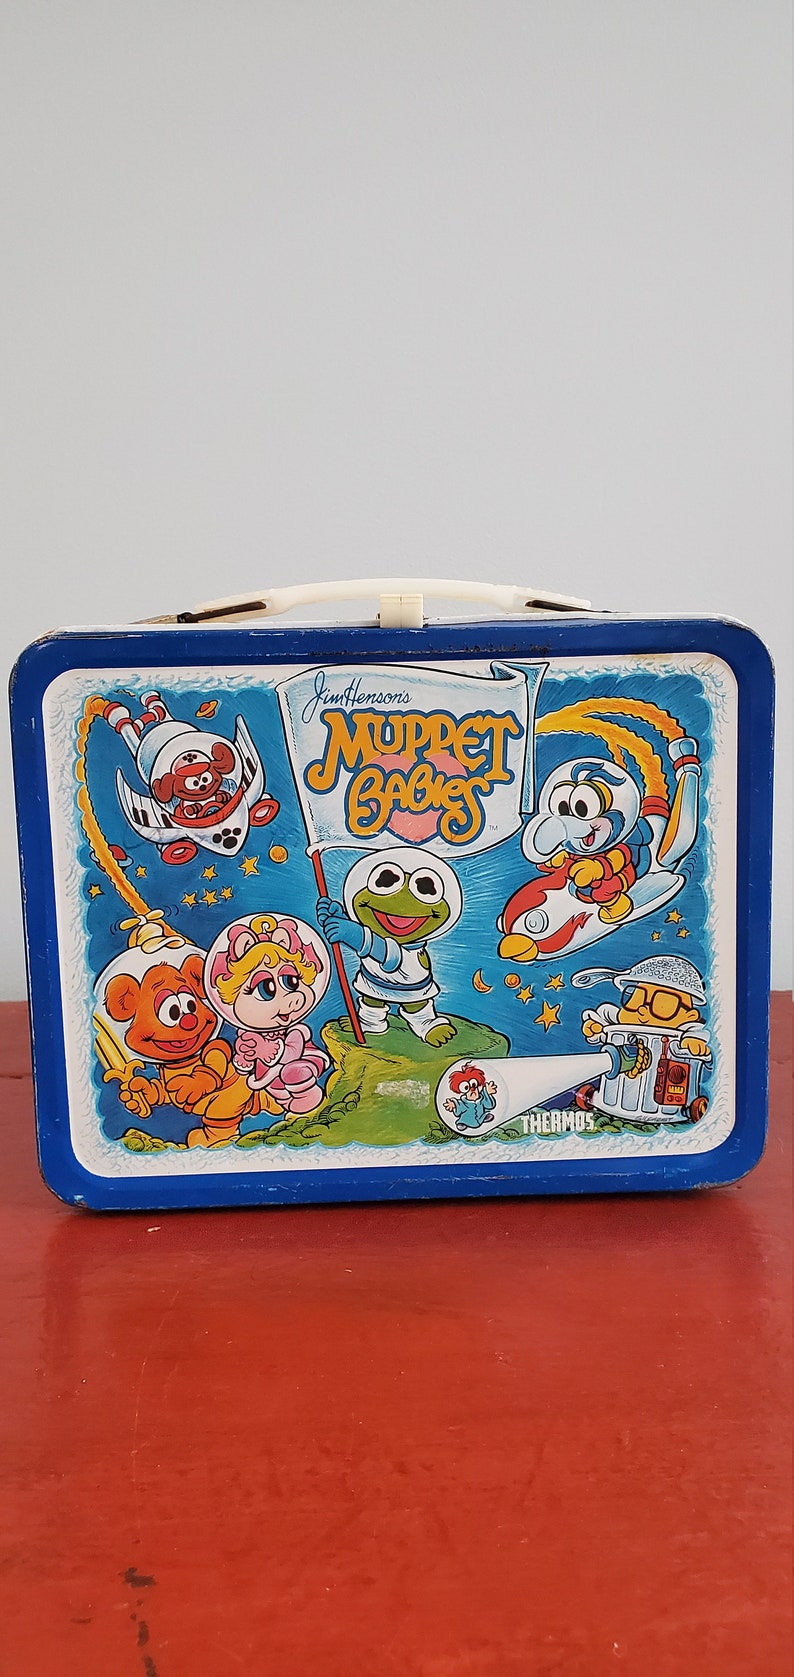 Vintage Muppet Babies Metal Lunch Box Jim Henson's The | Etsy